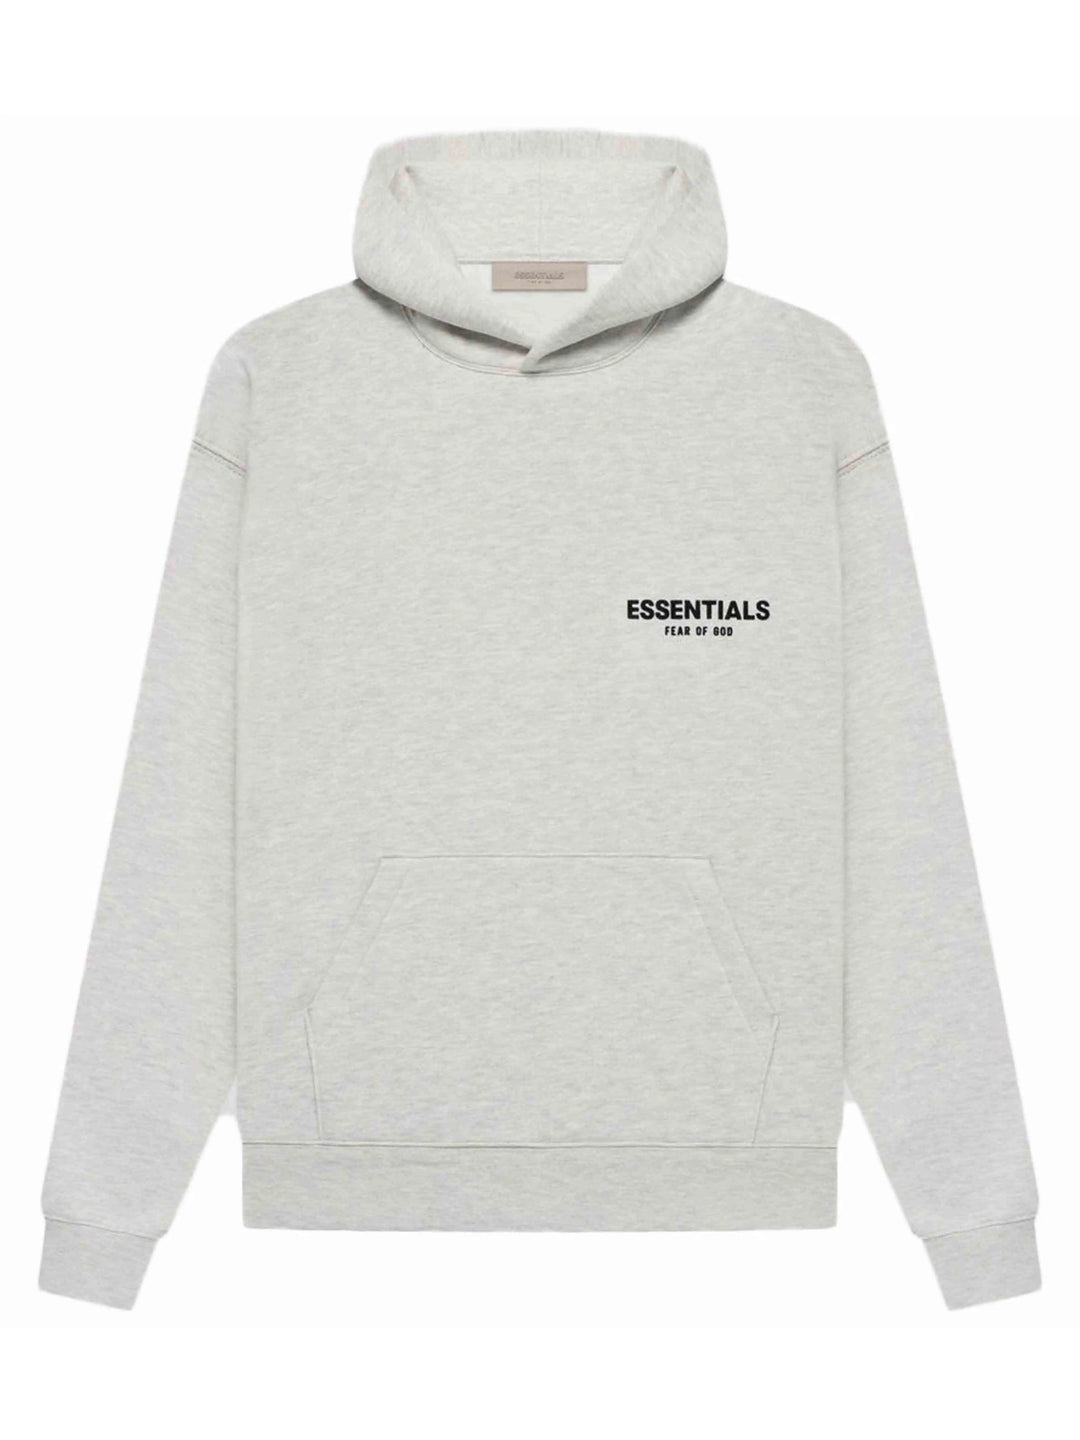 Fear of God Essentials Hoodie Light Oatmeal [SS22] [FACTORY FLAW] Prior